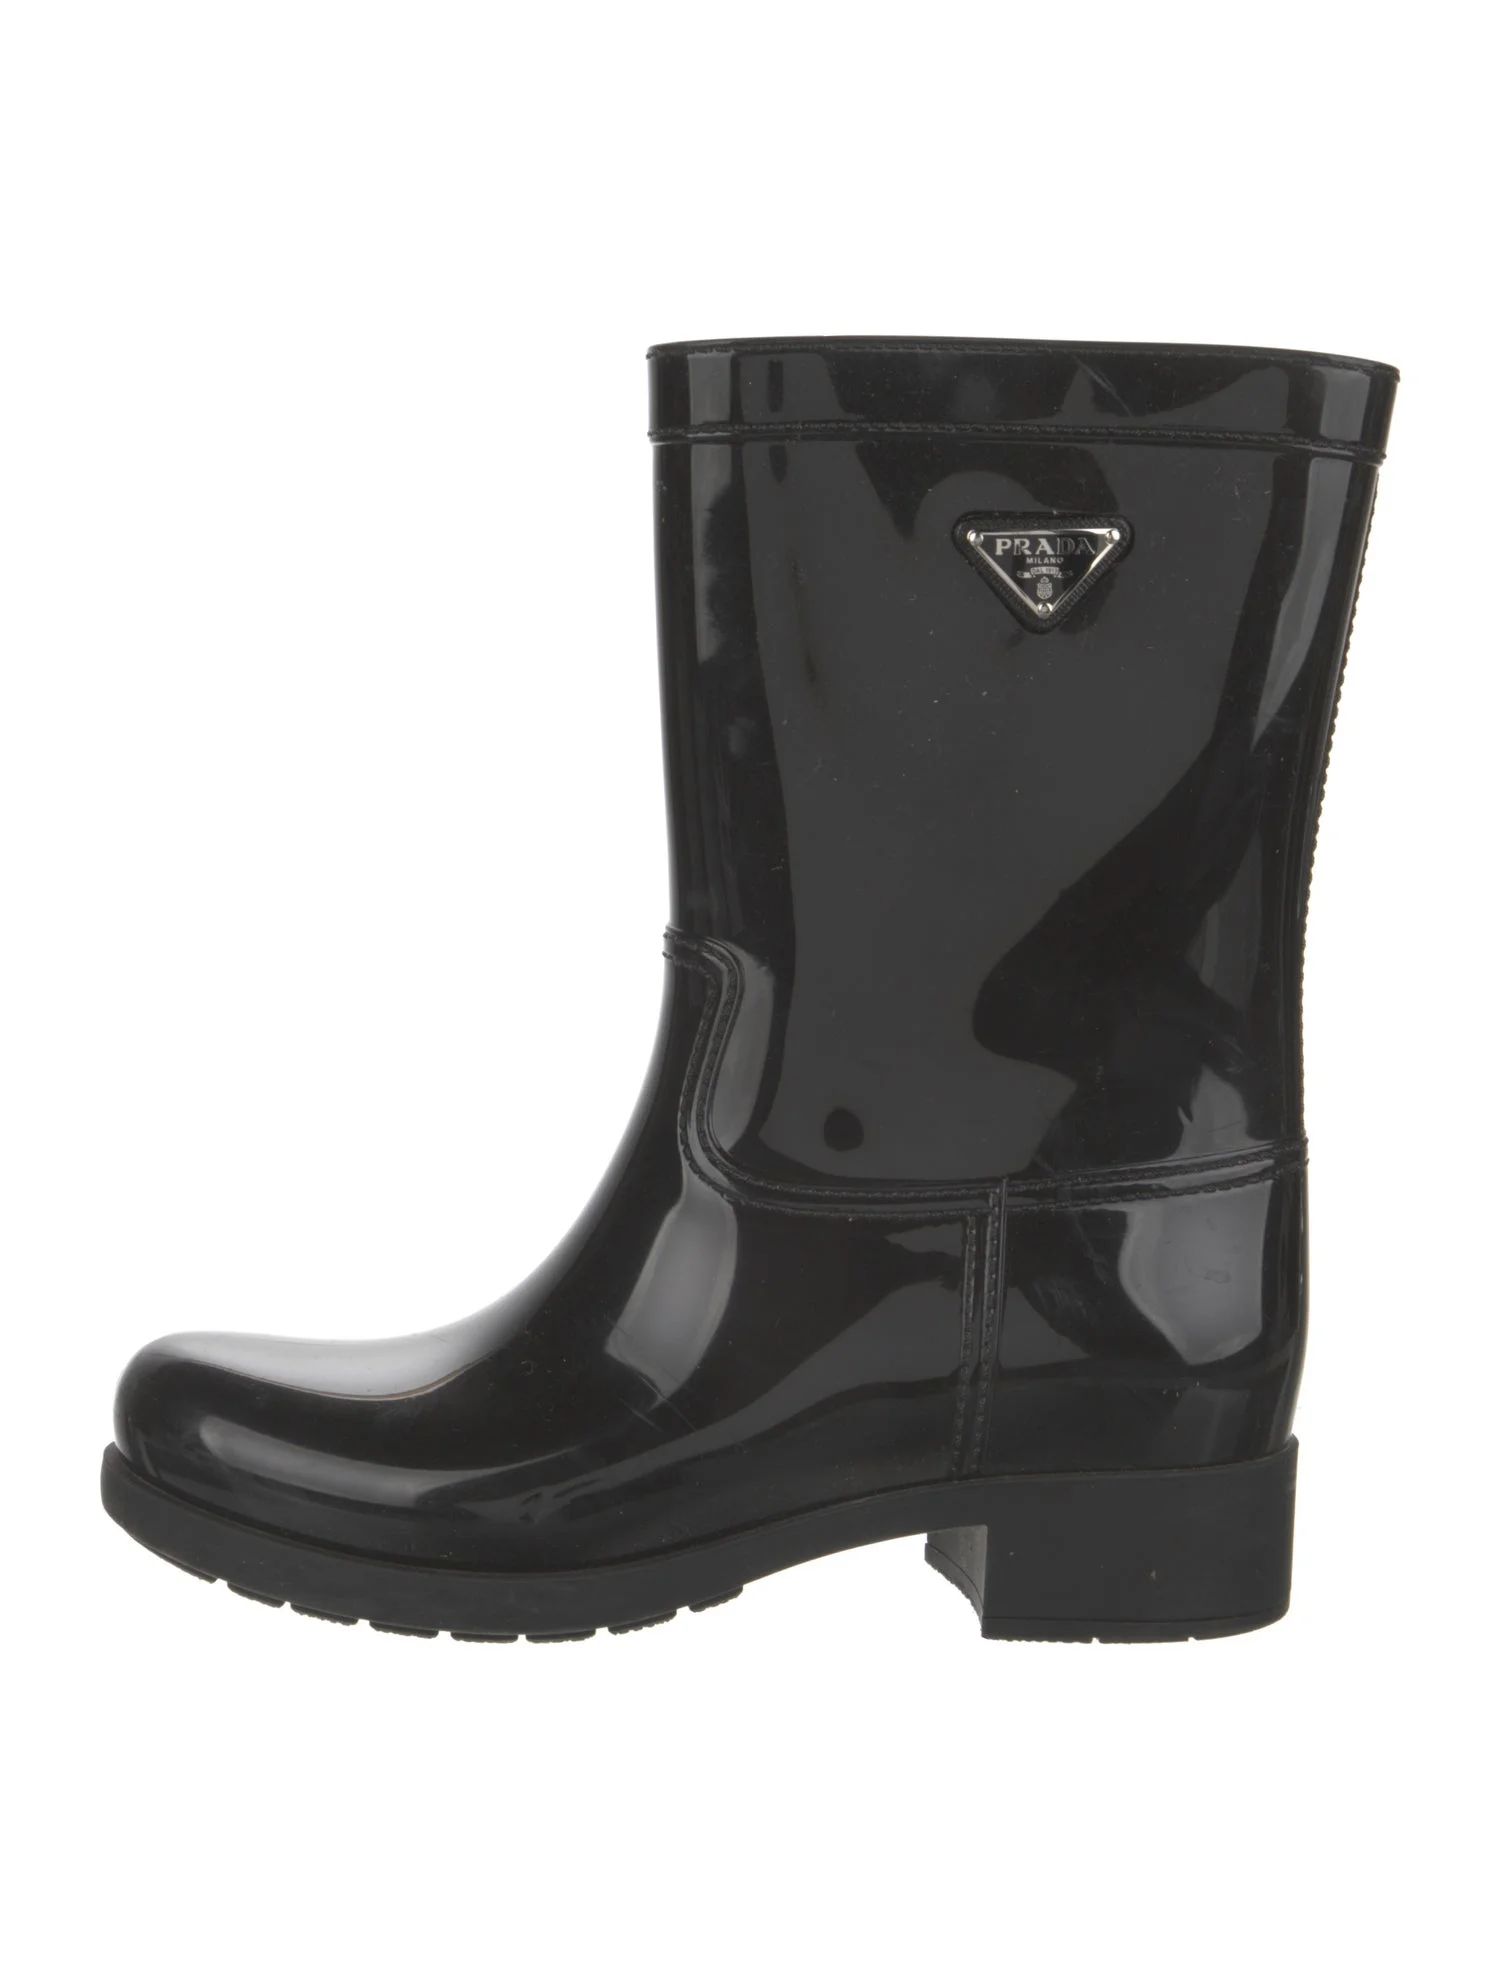 Rubber Rain Boots | The RealReal